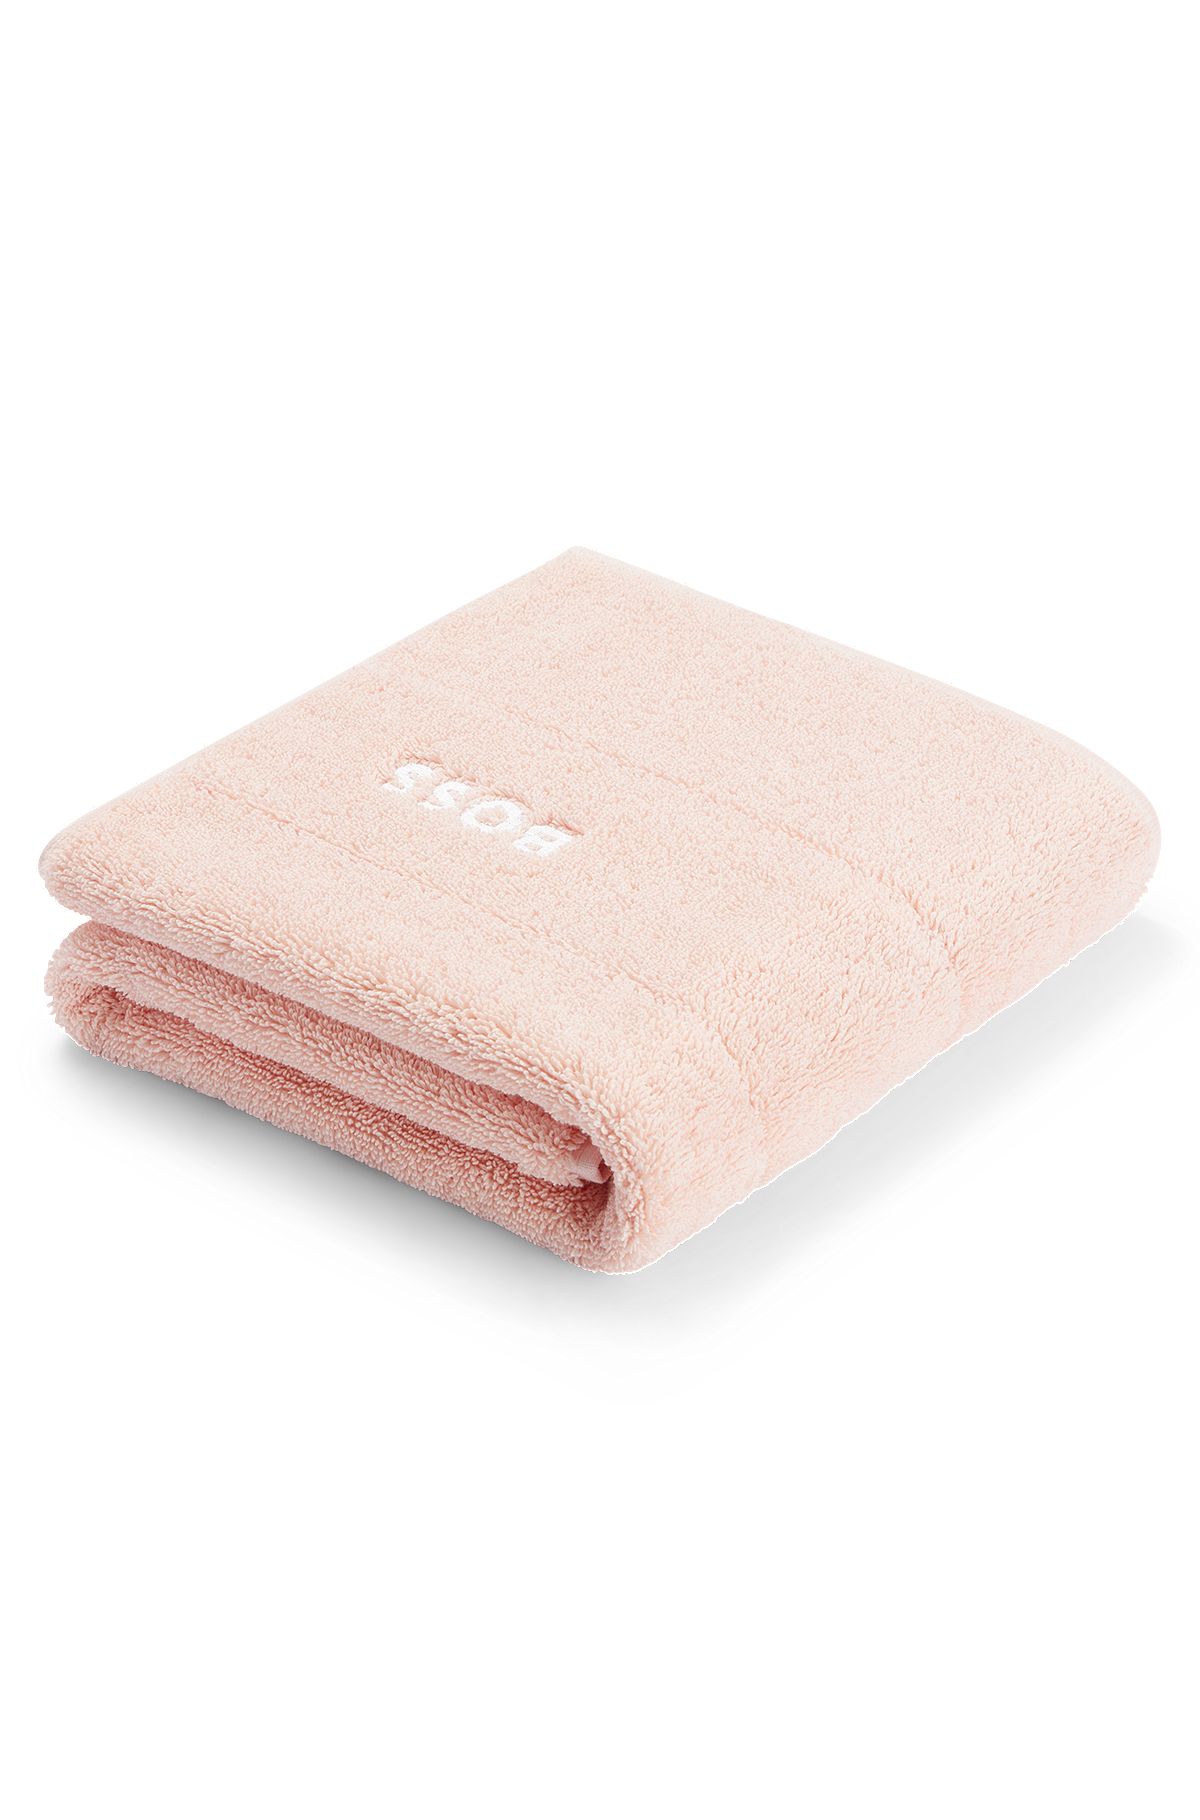 Cotton bath mat with contrast logo embroidery, Pink